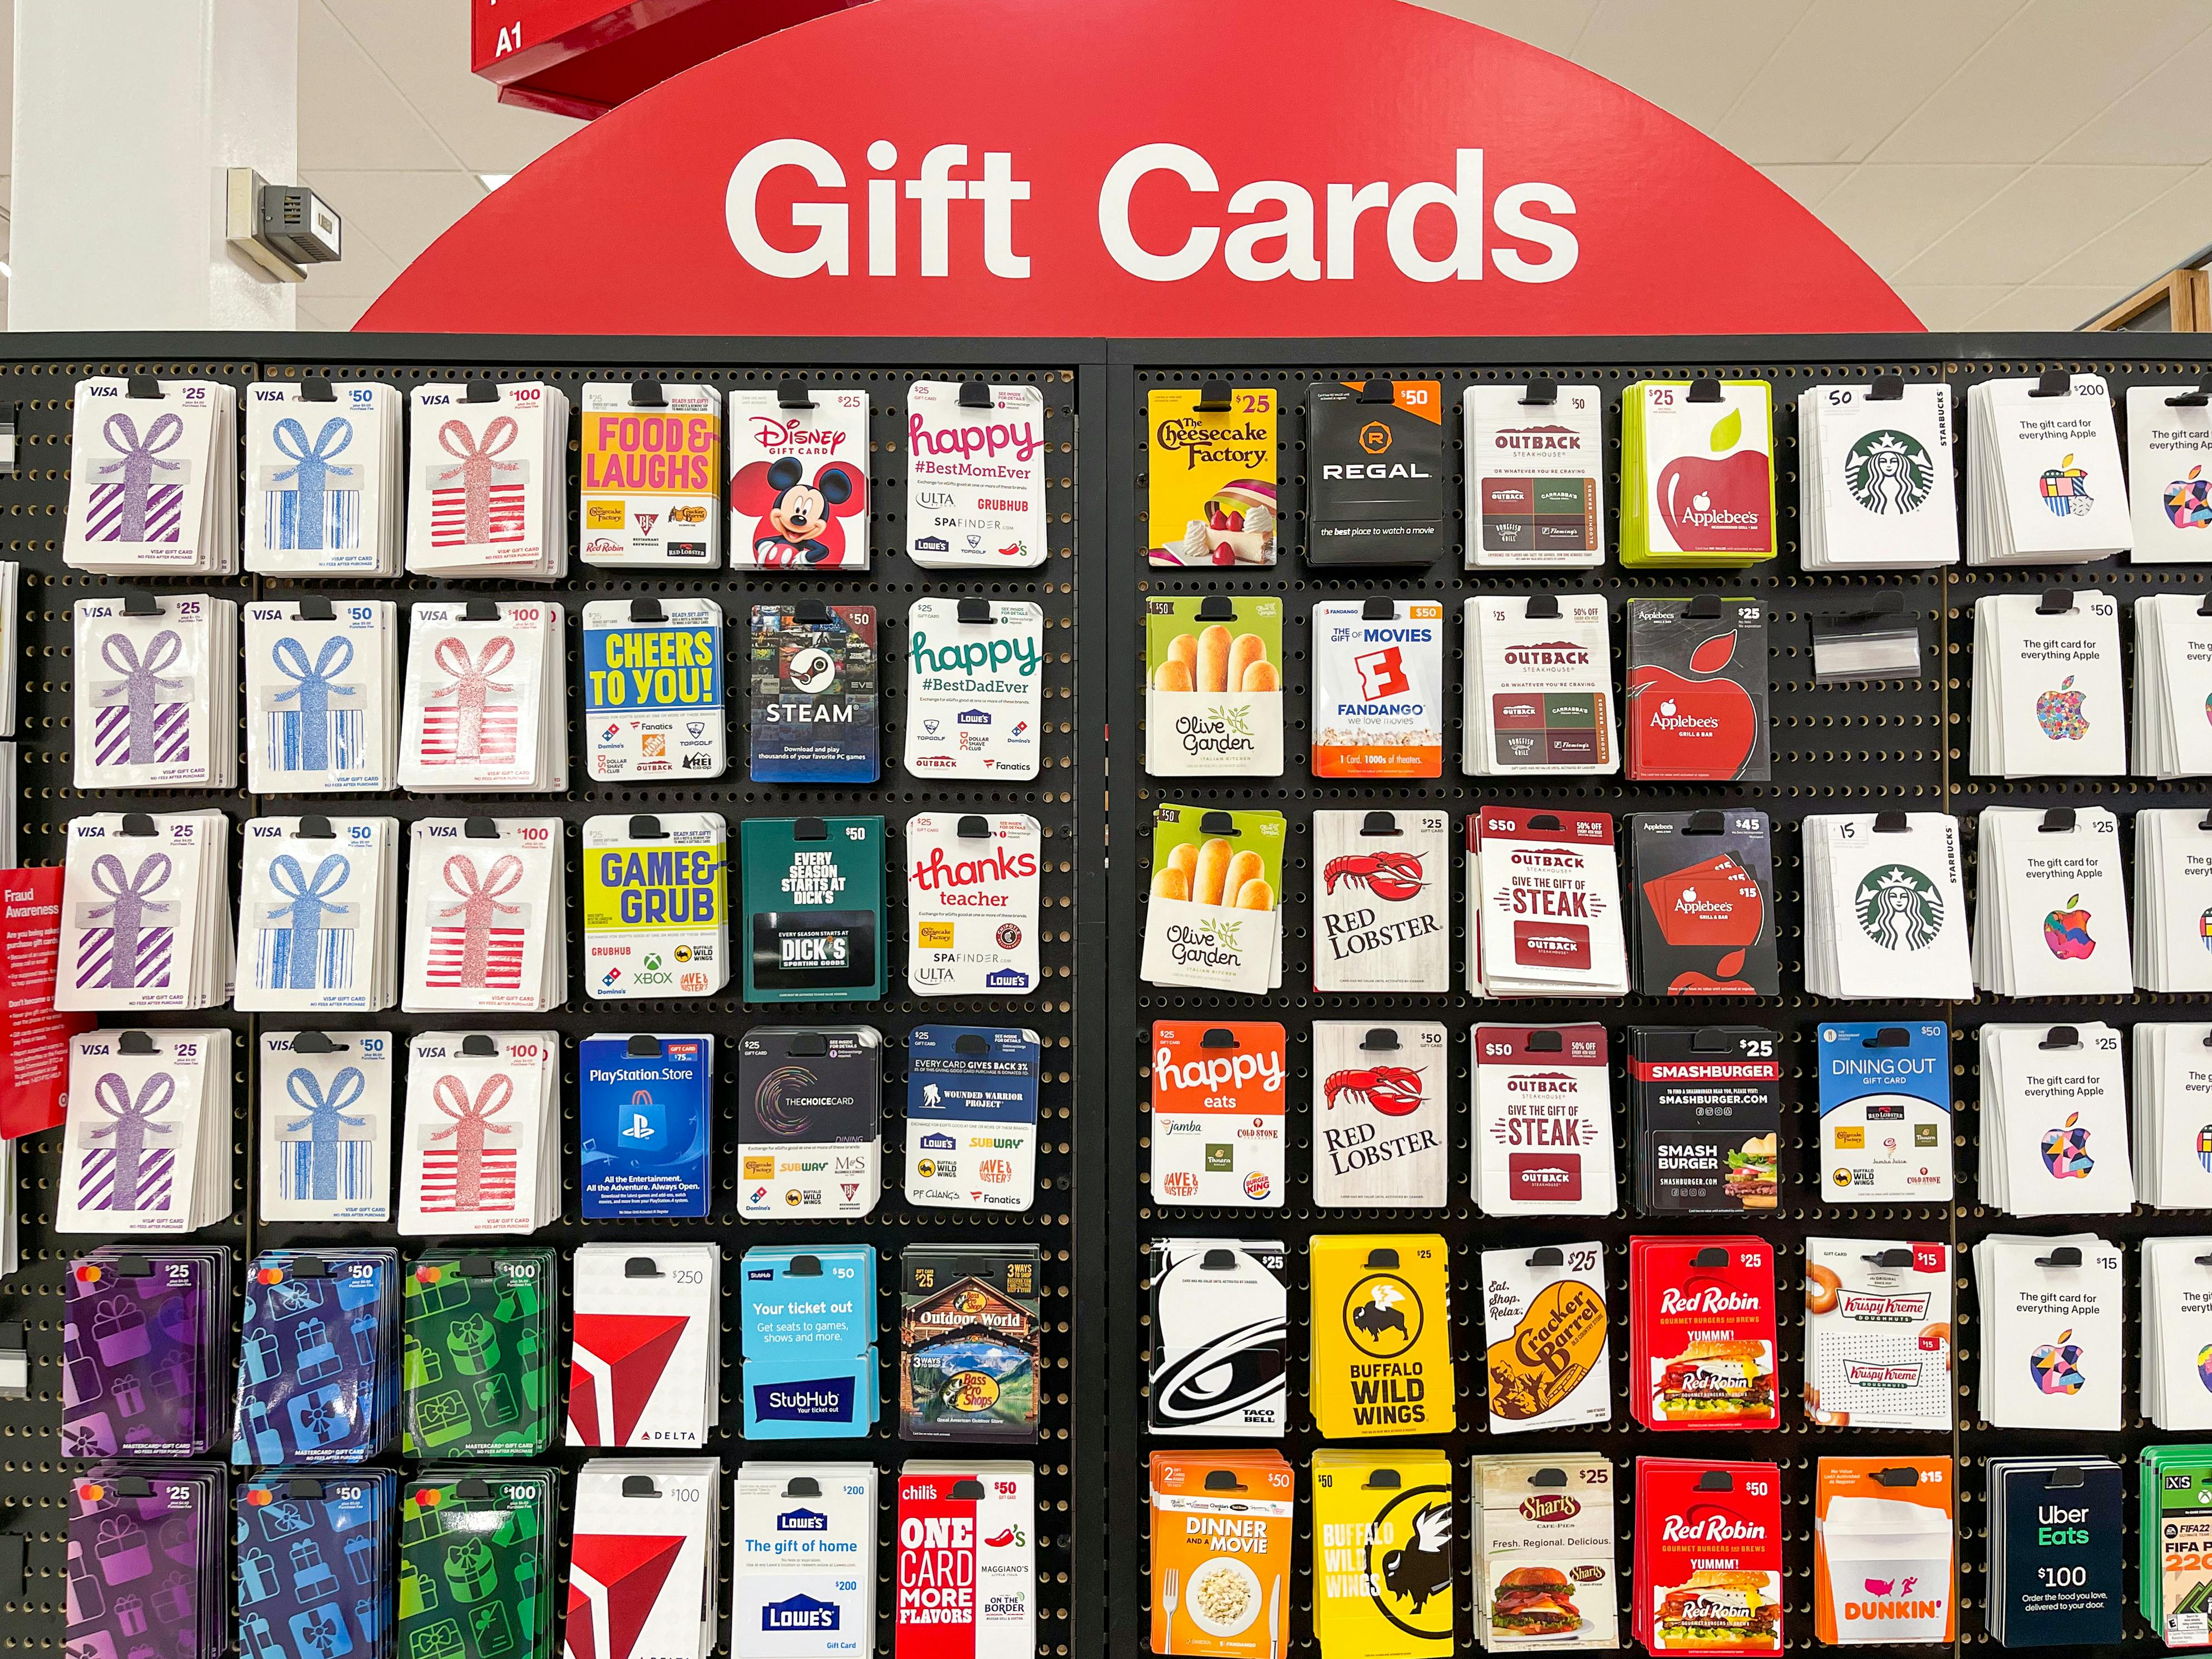 Does Target Carry Amazon Gift Cards?